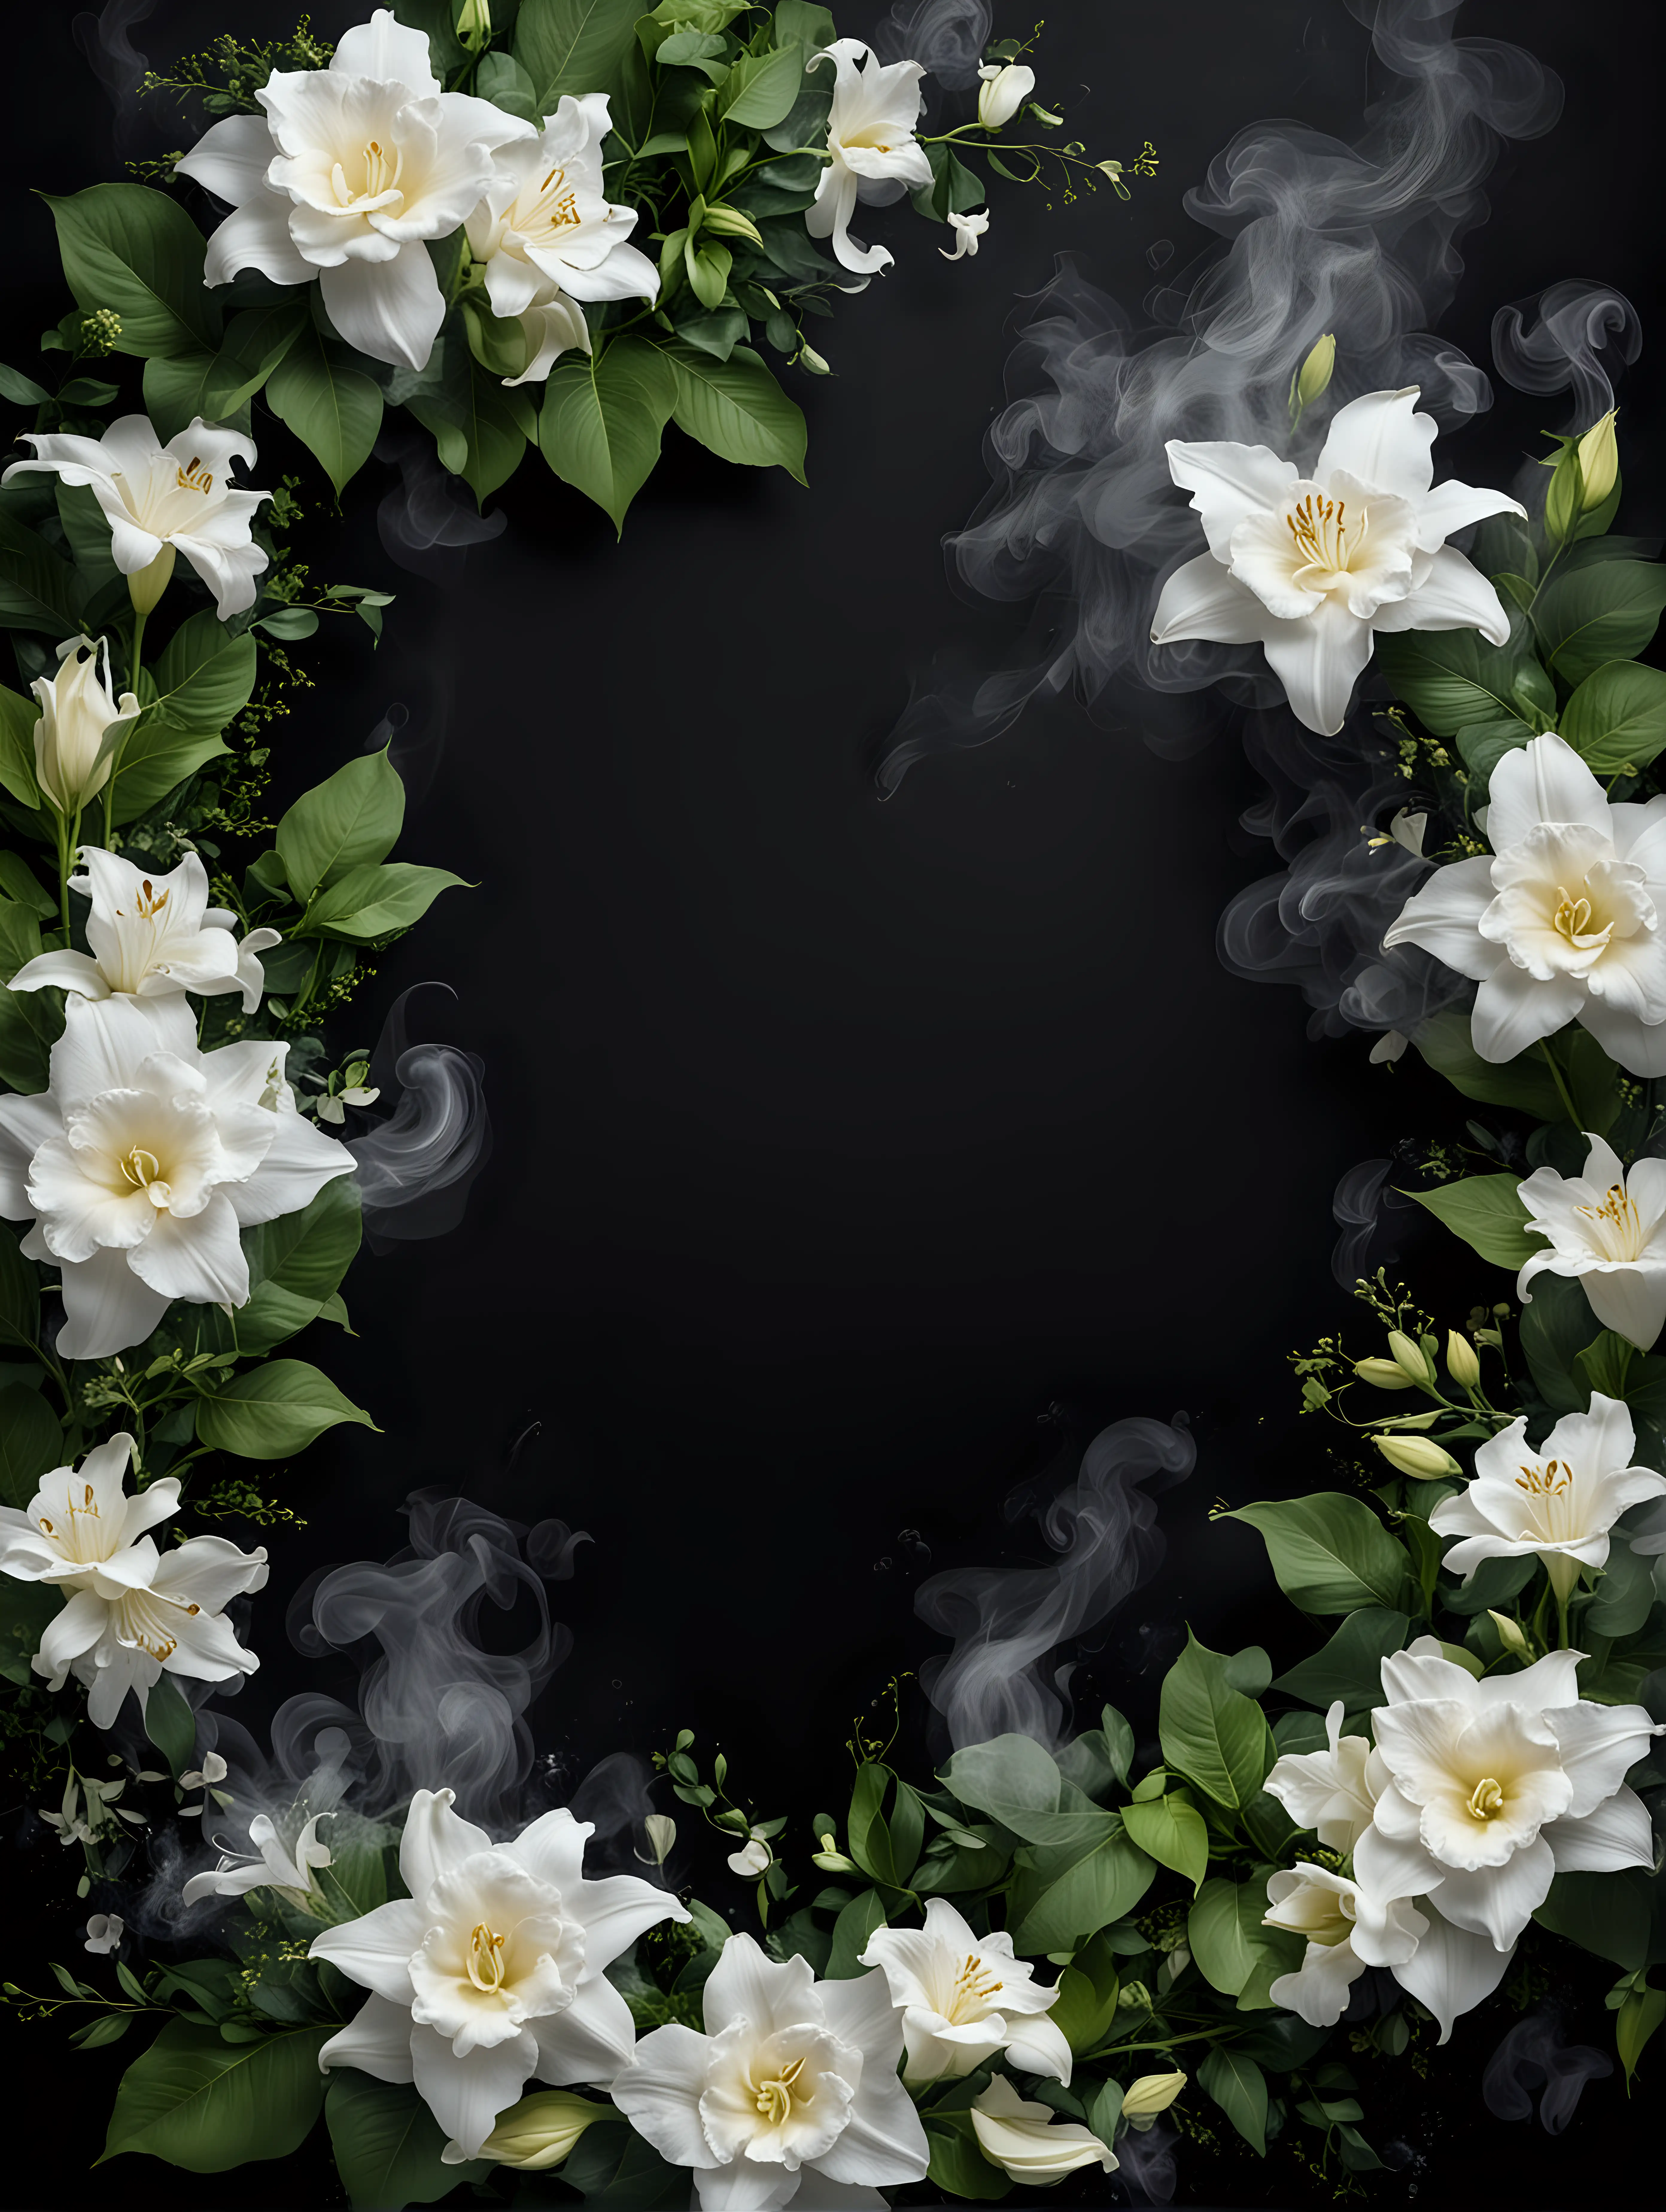 black solid background, floating smoke arranged in various shapes, in the smoke float flowers of white roses, lilies, ivy leaves, orchids